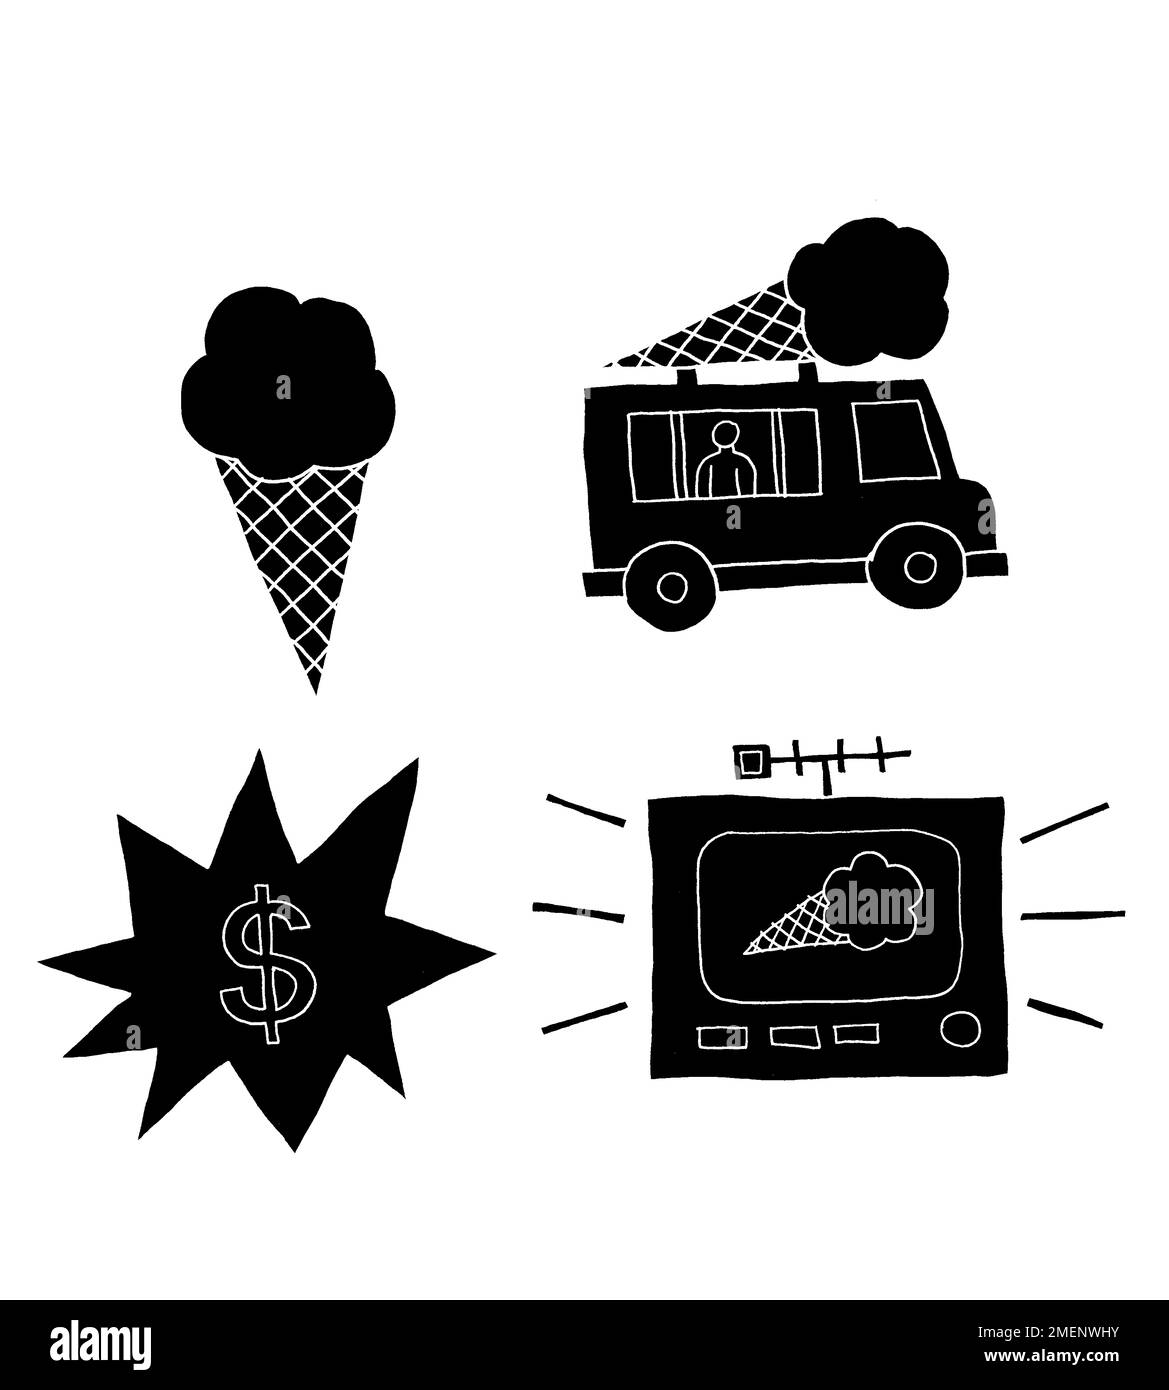 Black and white illustration of ice cream, ice cream van, price tag and ice cream advert, representing product, place, price and promotion Stock Photo